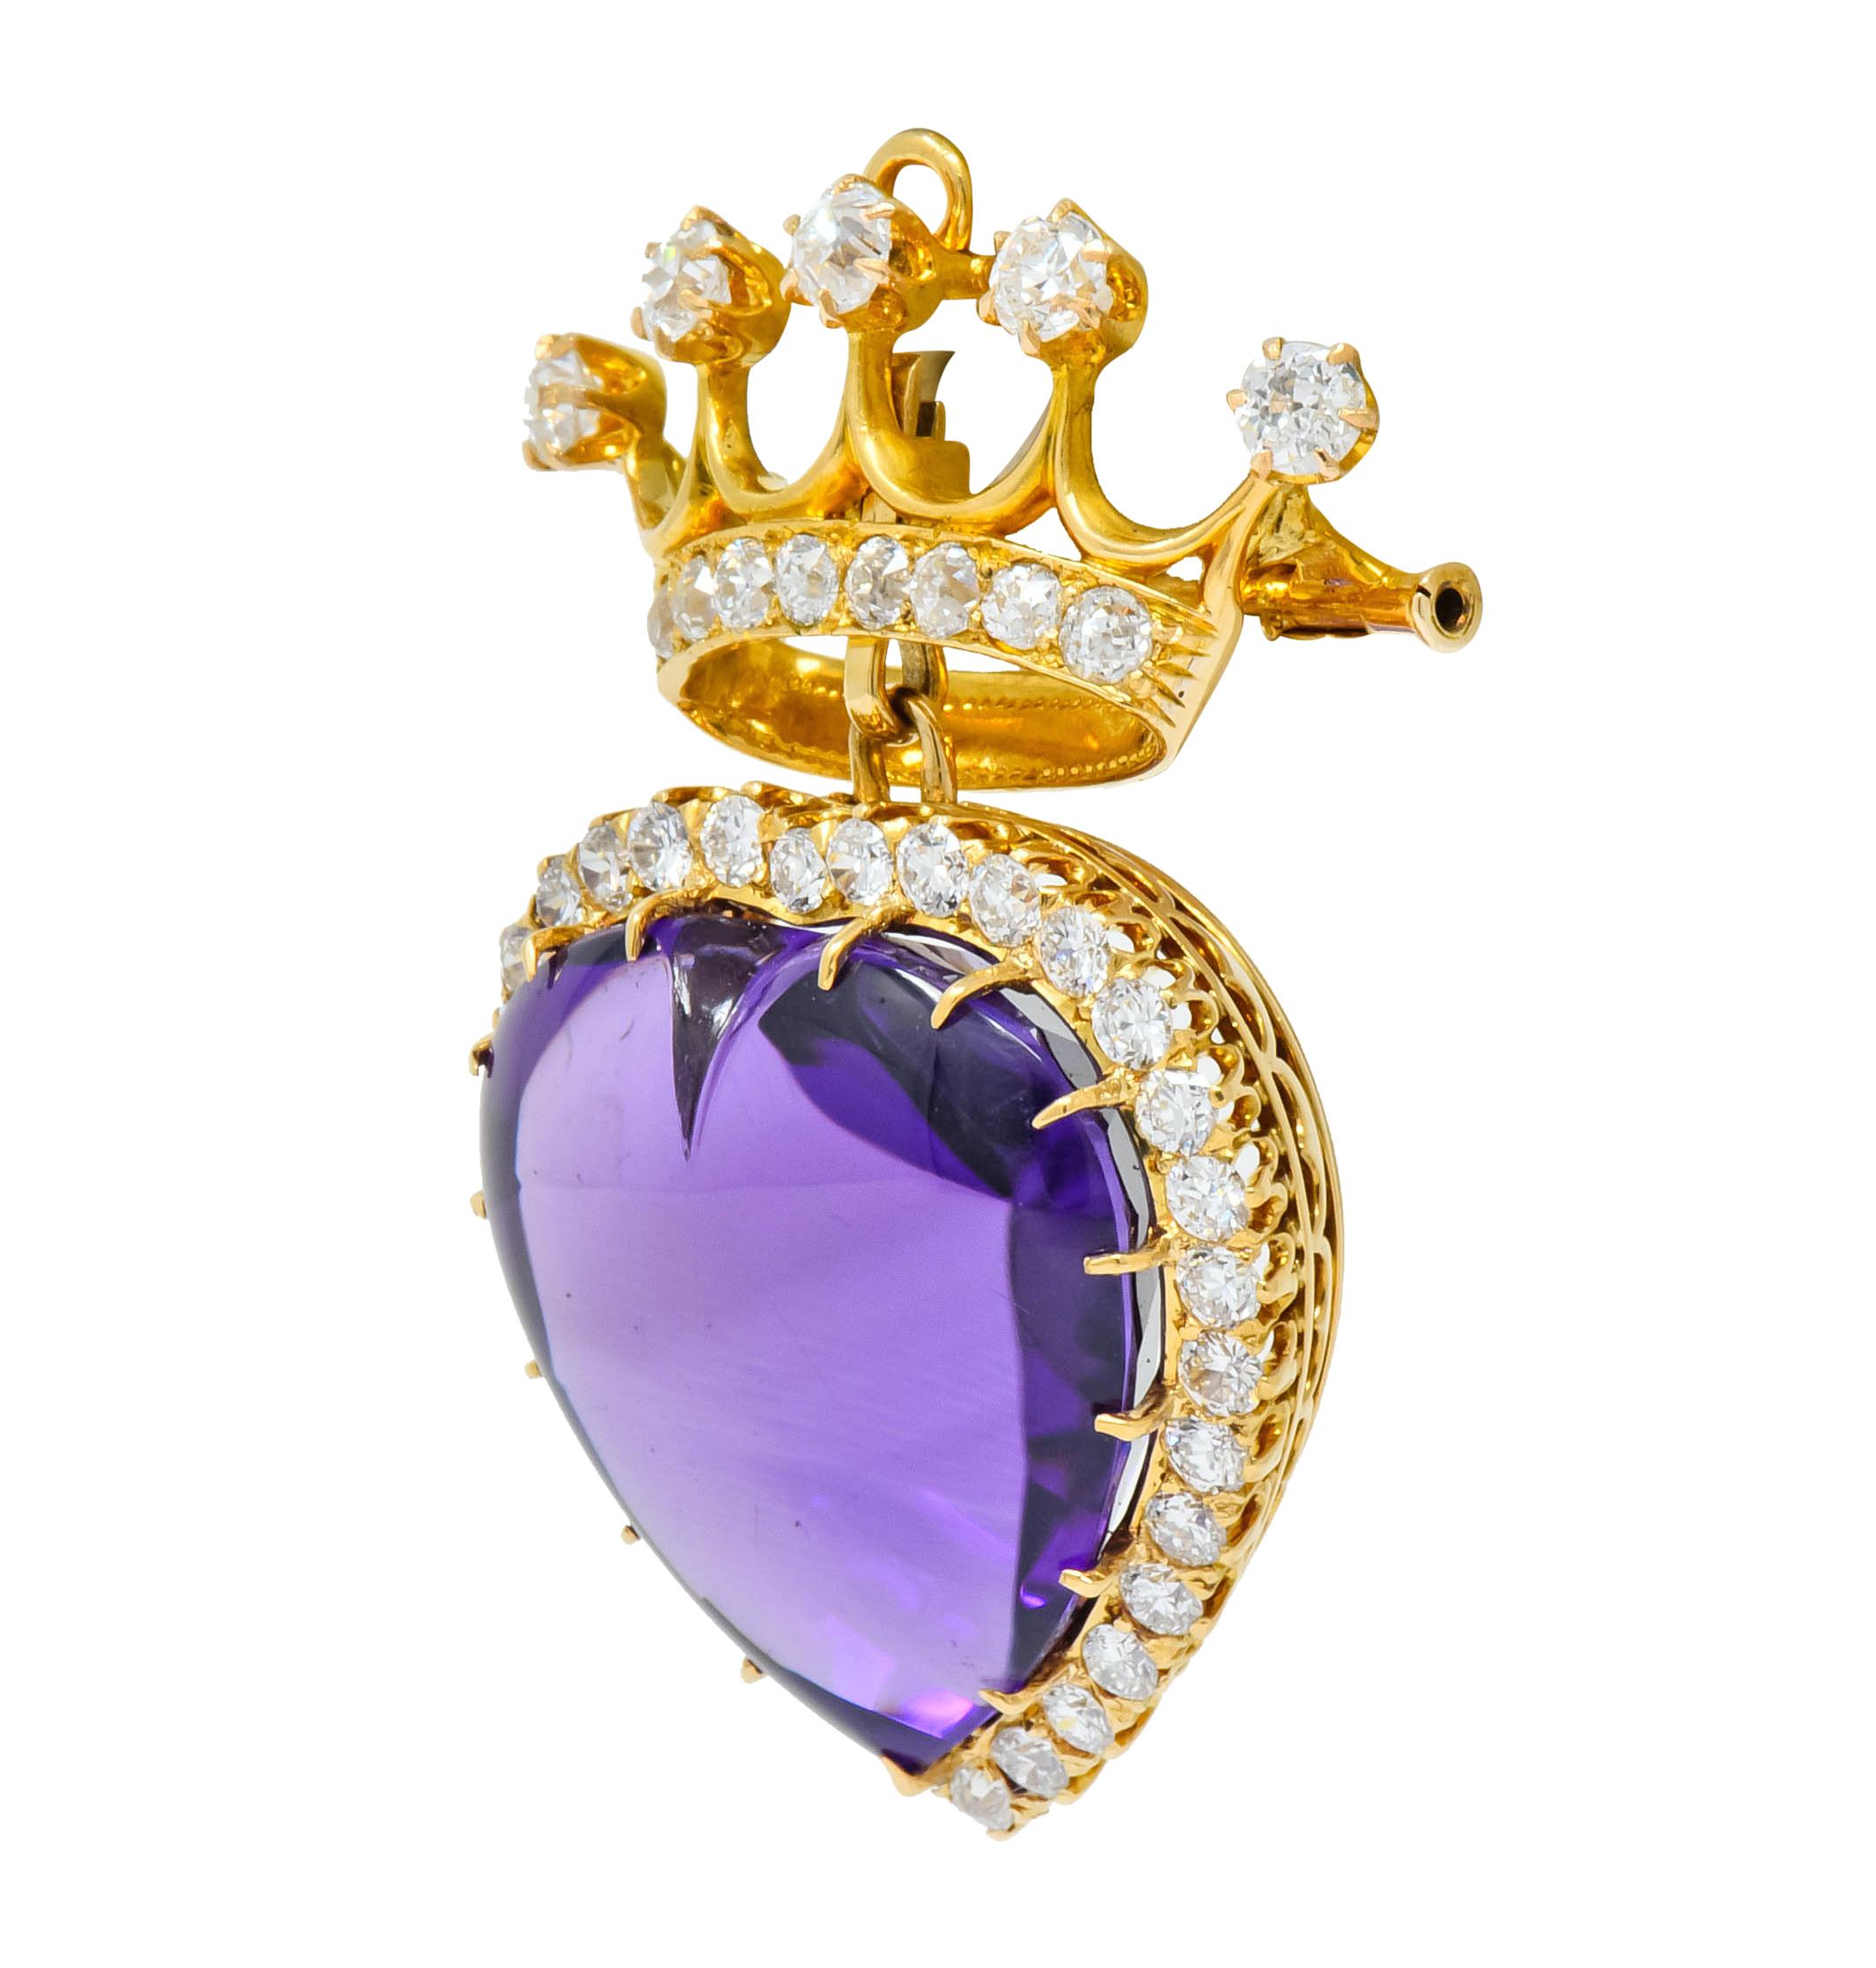 Brooch designed as polished gold crown with articulated heart drop featuring a heart cabochon amethyst measuring approximately 22.0 x 22.0 mm, medium-dark purple in color

Crown is accented by and heart is surrounded by old European cut diamonds